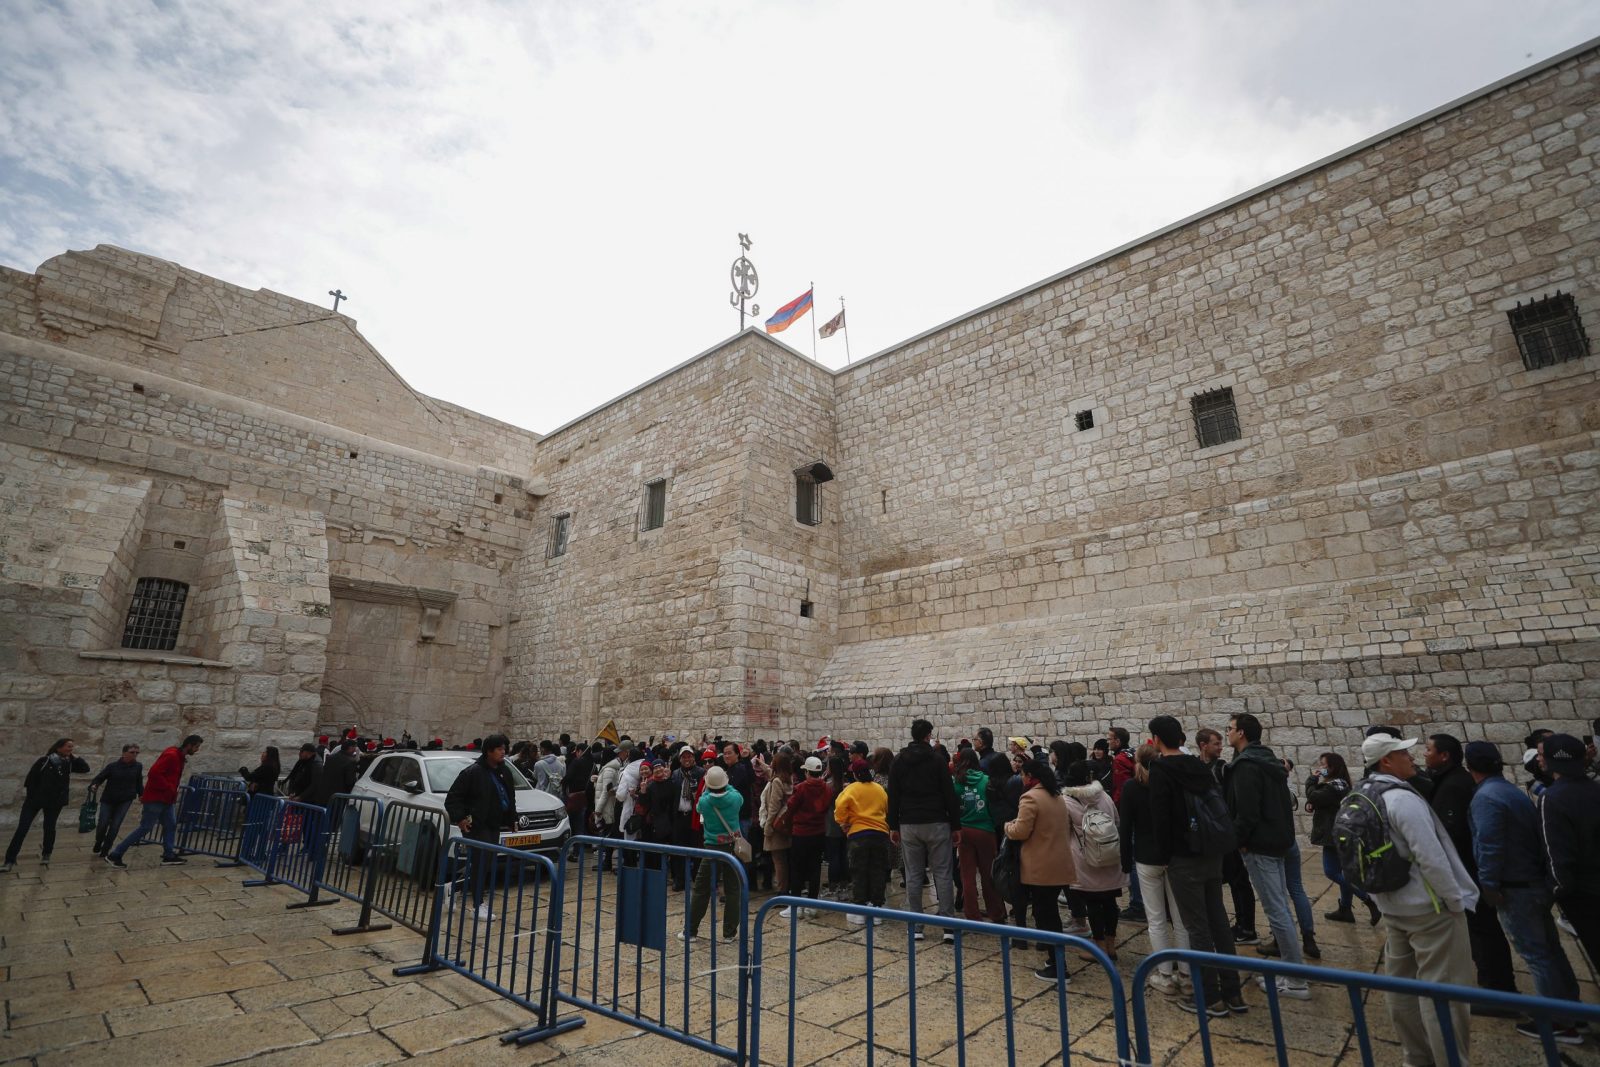 epa10377475 Christian pilgrims wait in line at the  Church of Nativity on Christmas eve, in the West Bank city of Bethlehem, 24 December 2022. The Church of the Nativity is one of the oldest continuously operating churches worldwide. The structure is built over the cave that tradition marks as the birthplace of Christ, and it is considered sacred by followers of Christianity.  EPA/ATEF SAFADI